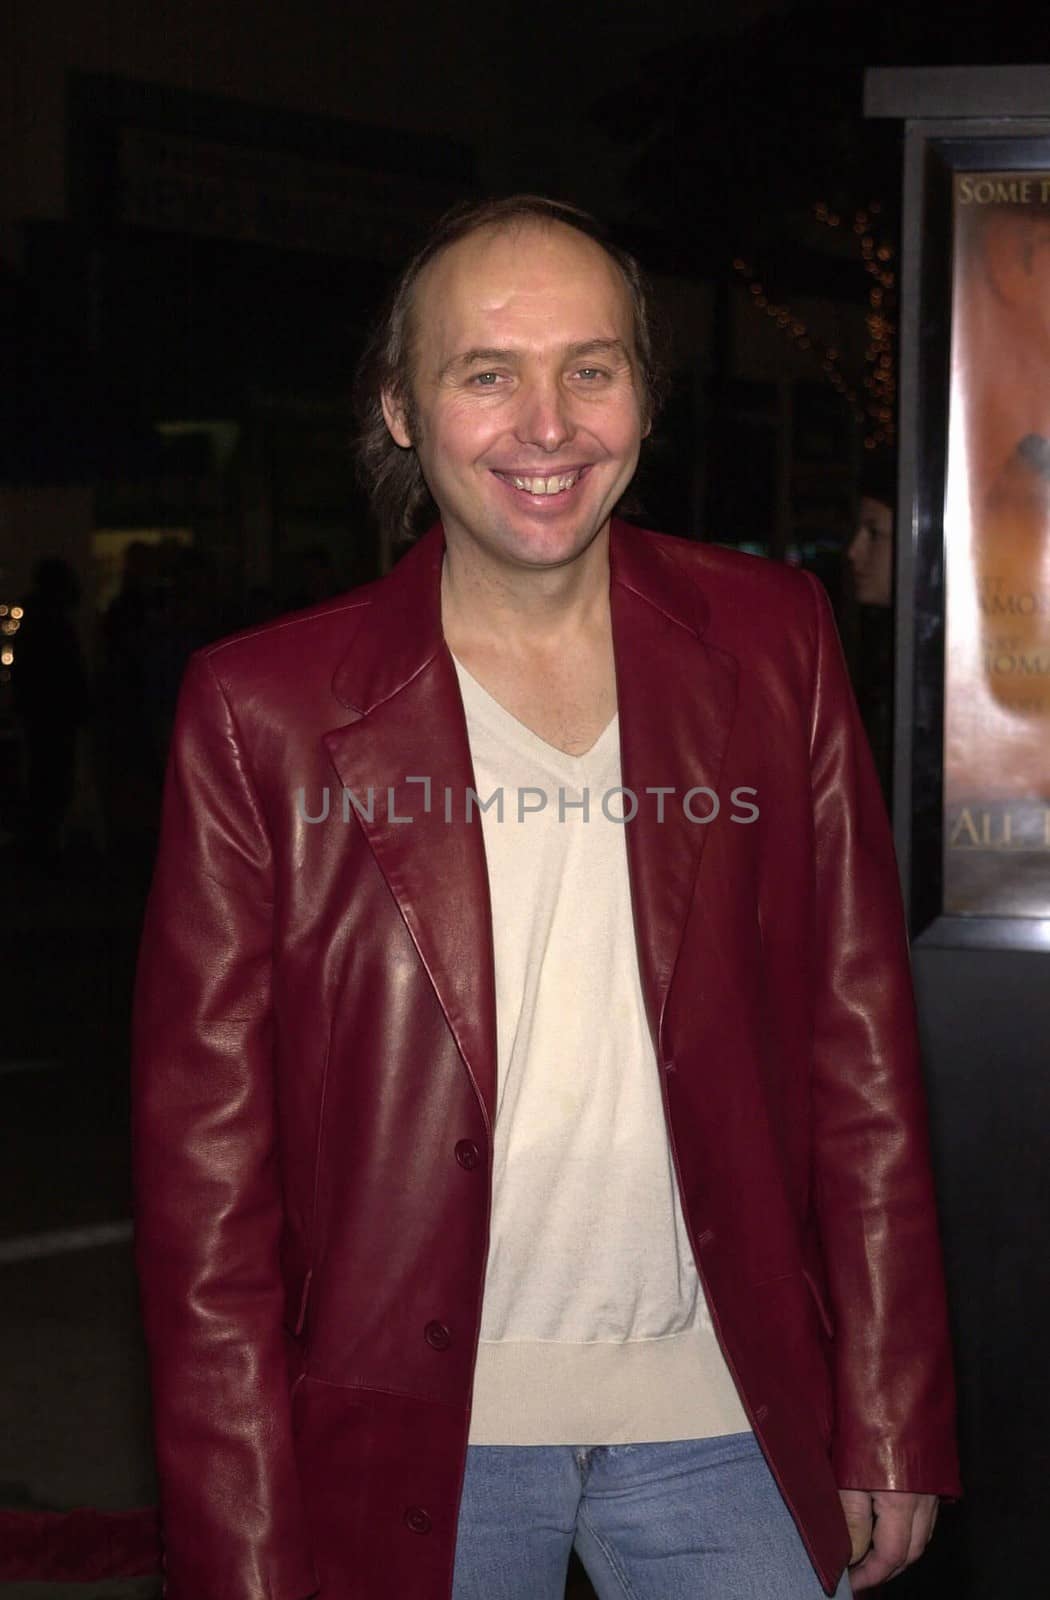 Dwight Yoakum at the premiere of Miramax's "All The Pretty Horses," in Westwood, 12-17-00